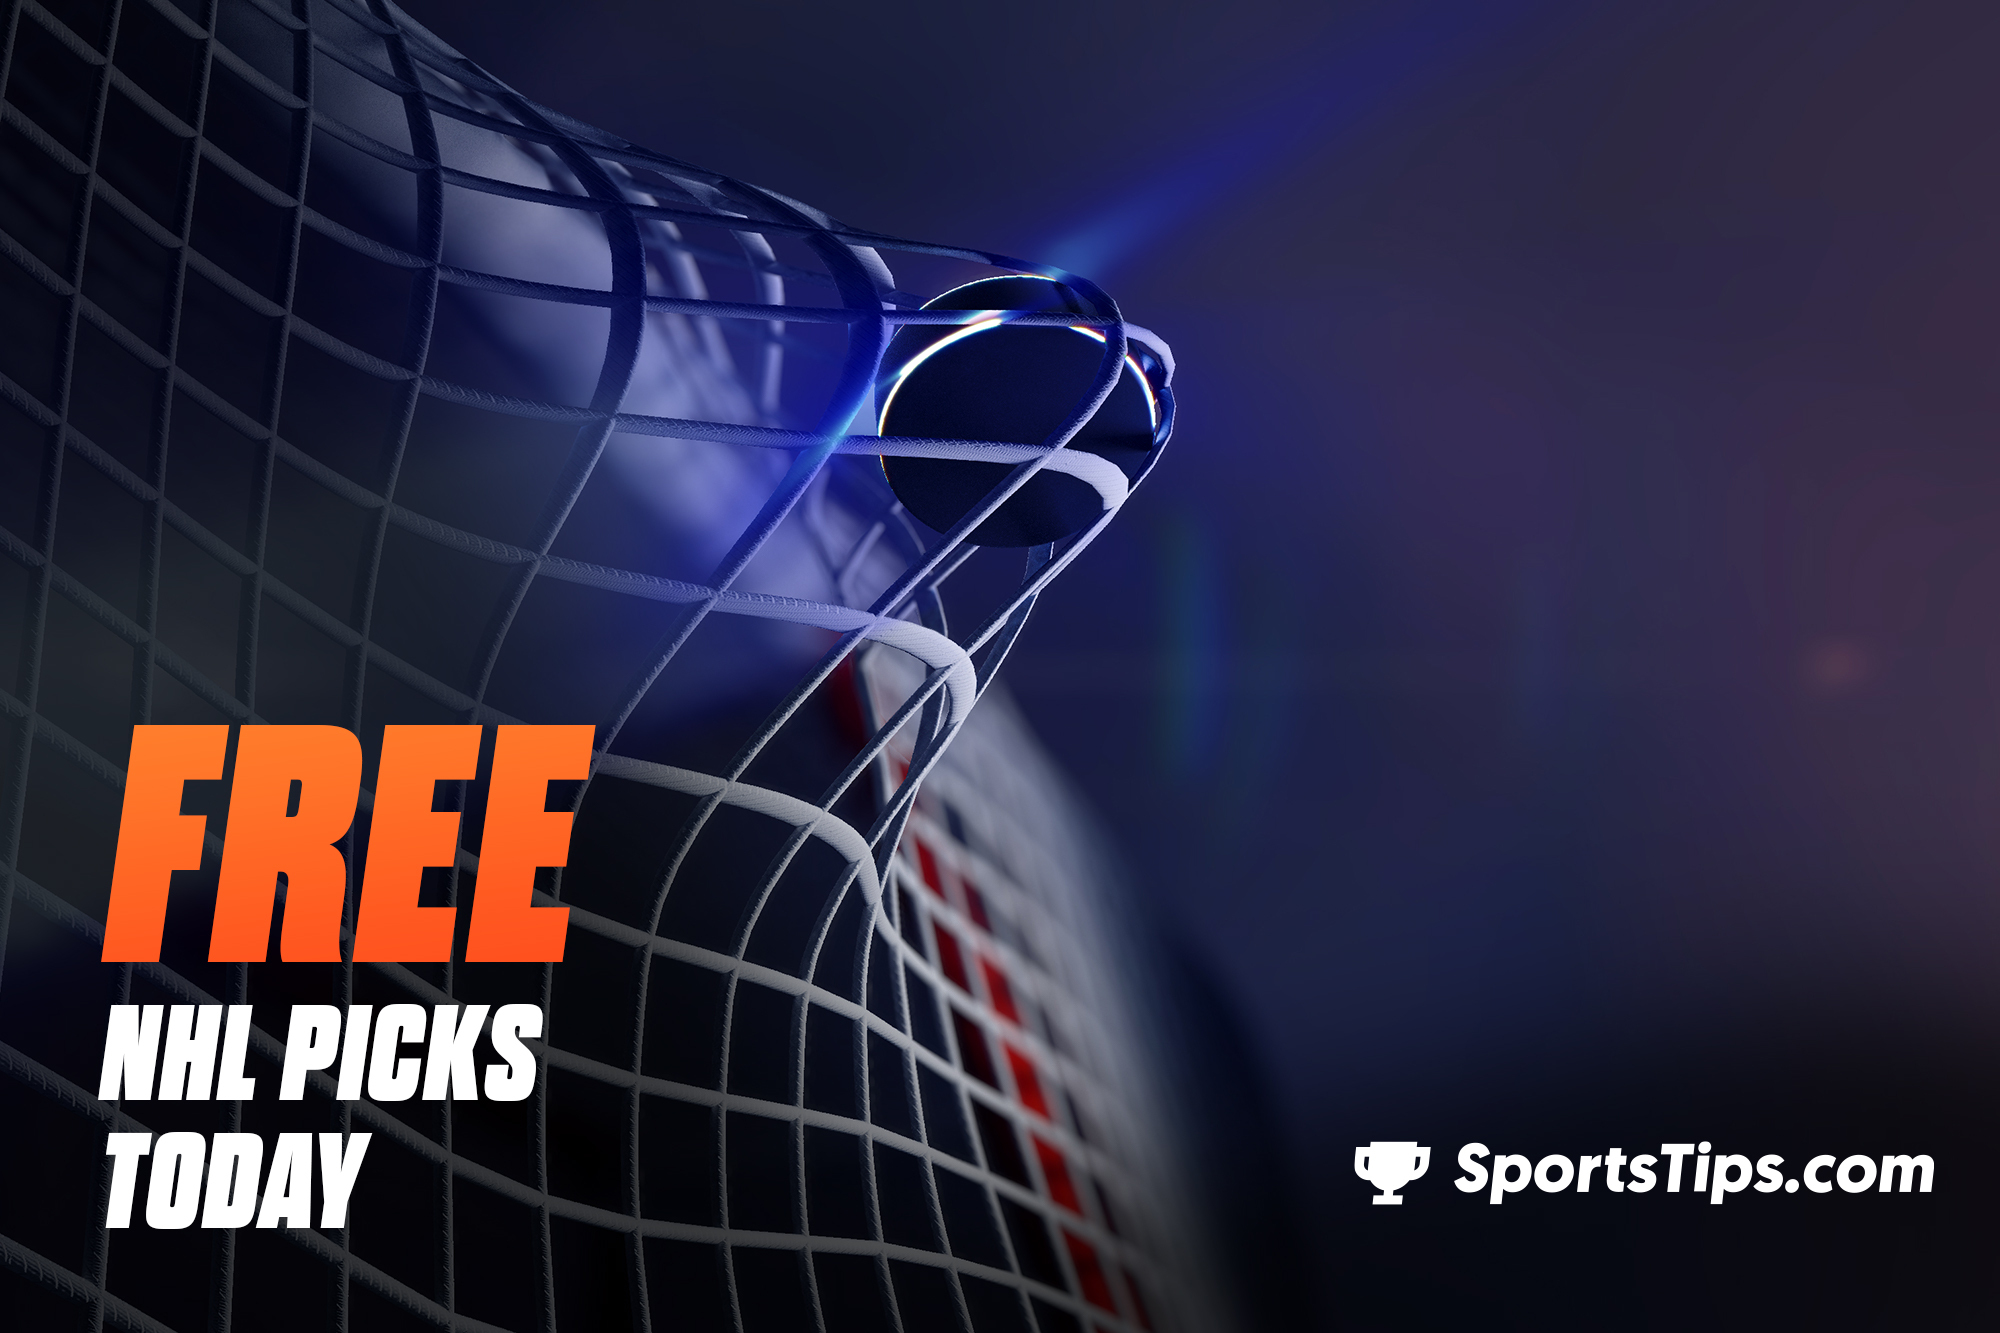 Free NHL Picks Today for Sunday, January 30th, 2022